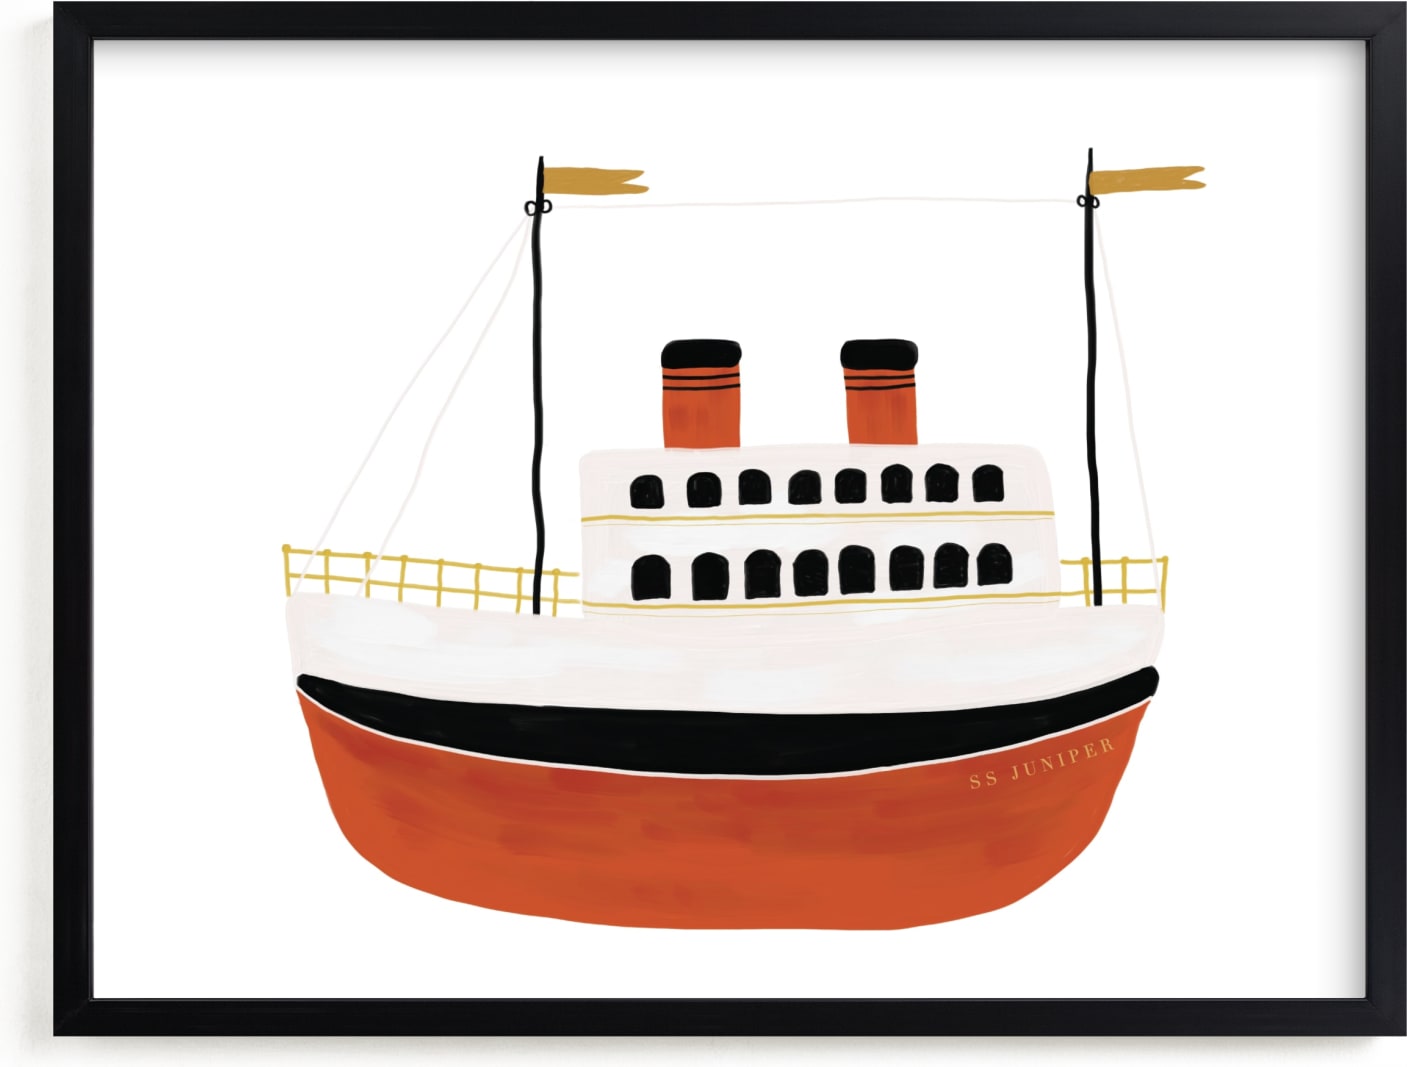 This is a black, red, white personalized art for kid by Maja Cunningham called Schooner II.